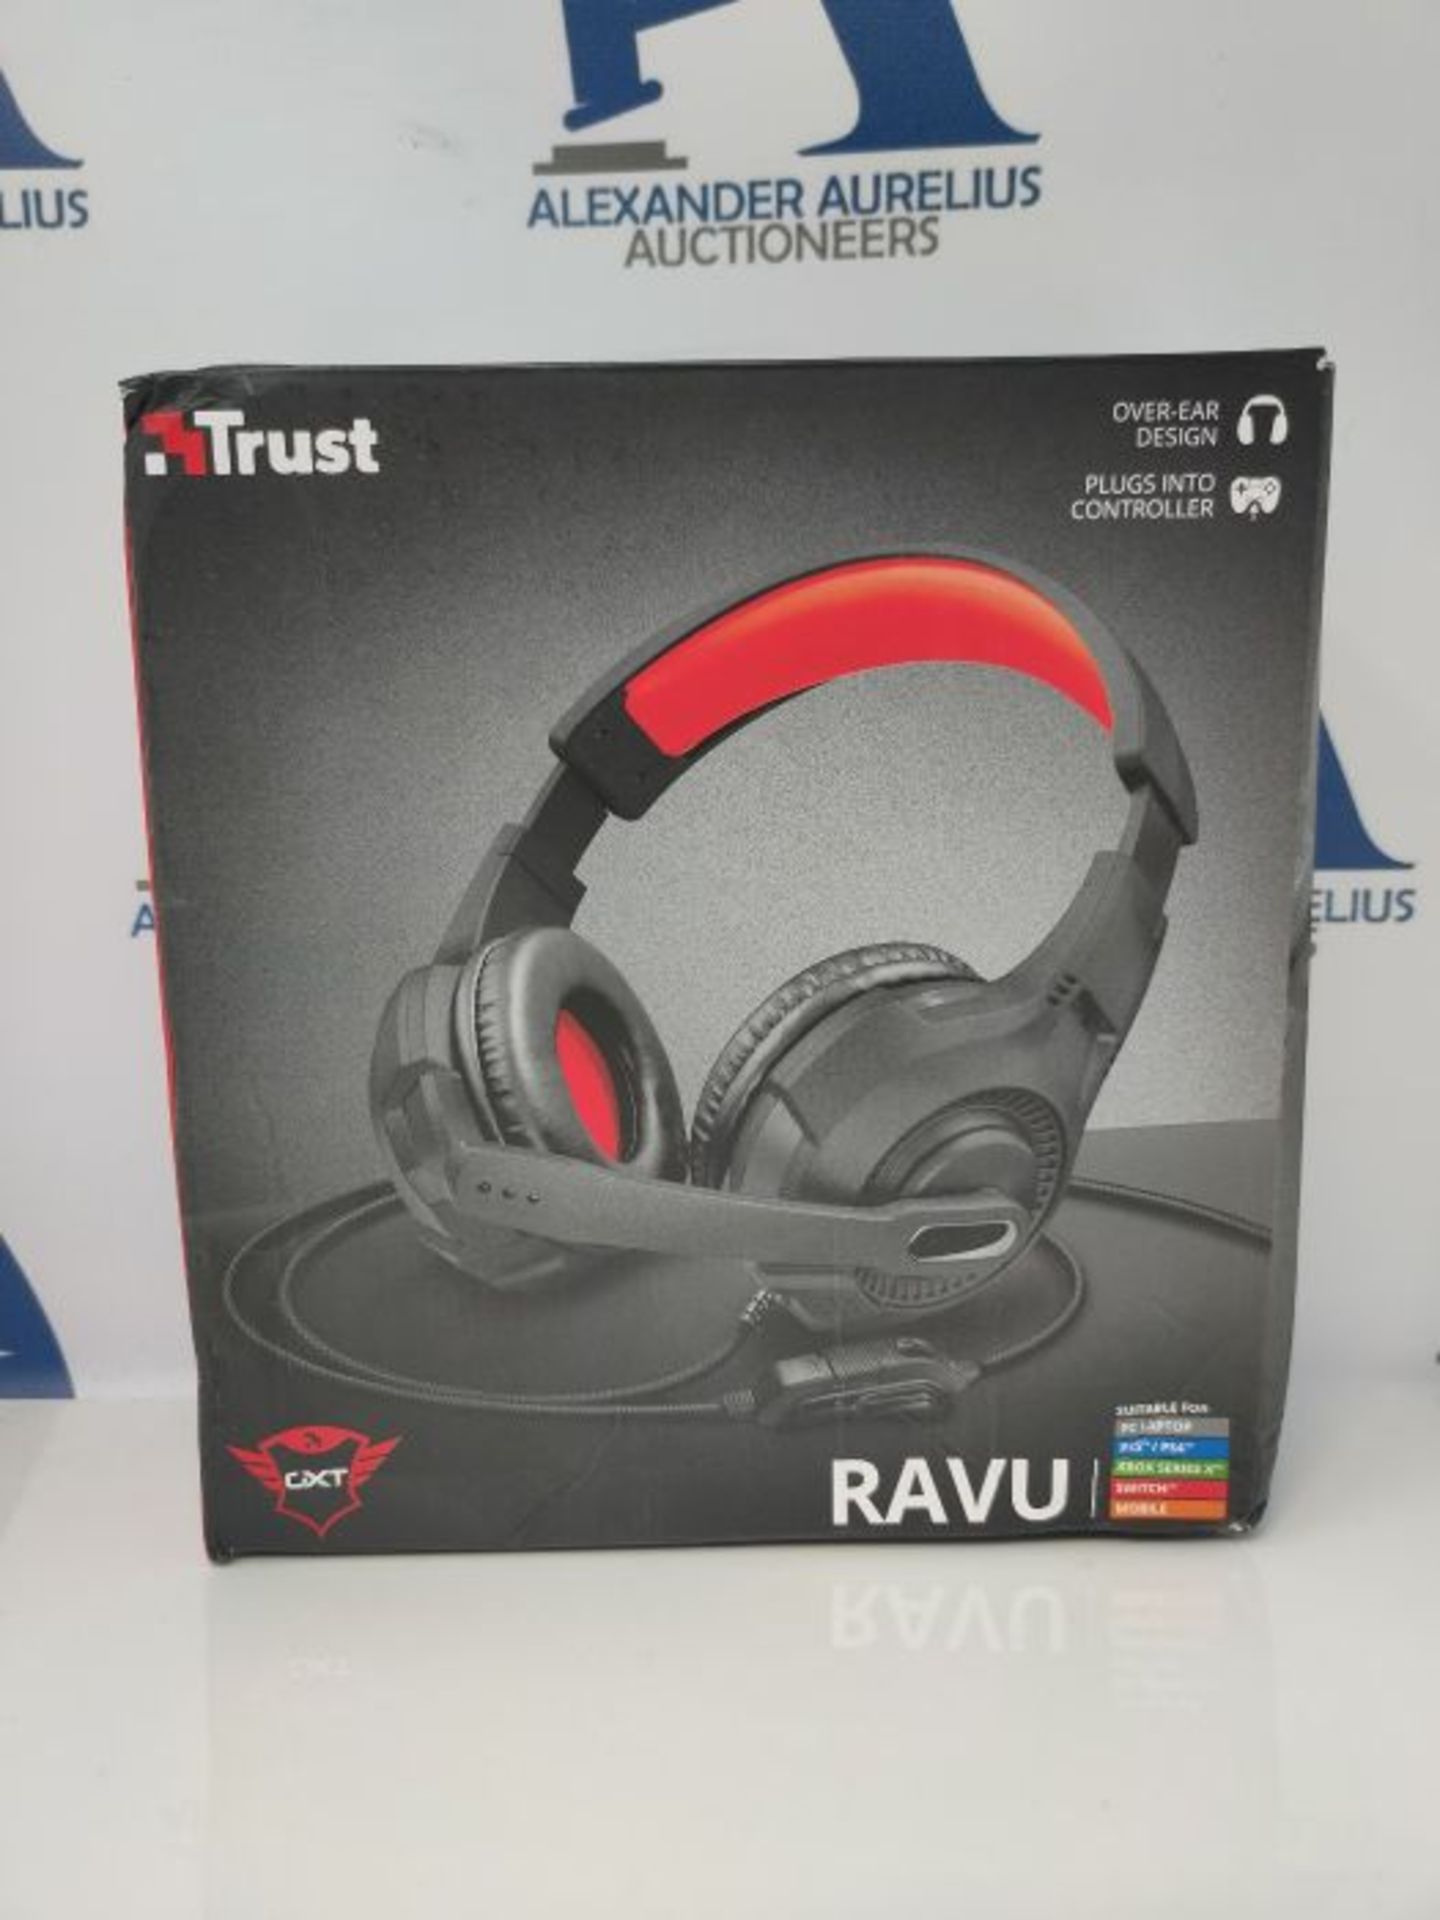 Trust Gaming Headset GXT 307 Ravu with Microphone, Fold Away Mic and Adjustable Headba - Image 2 of 3